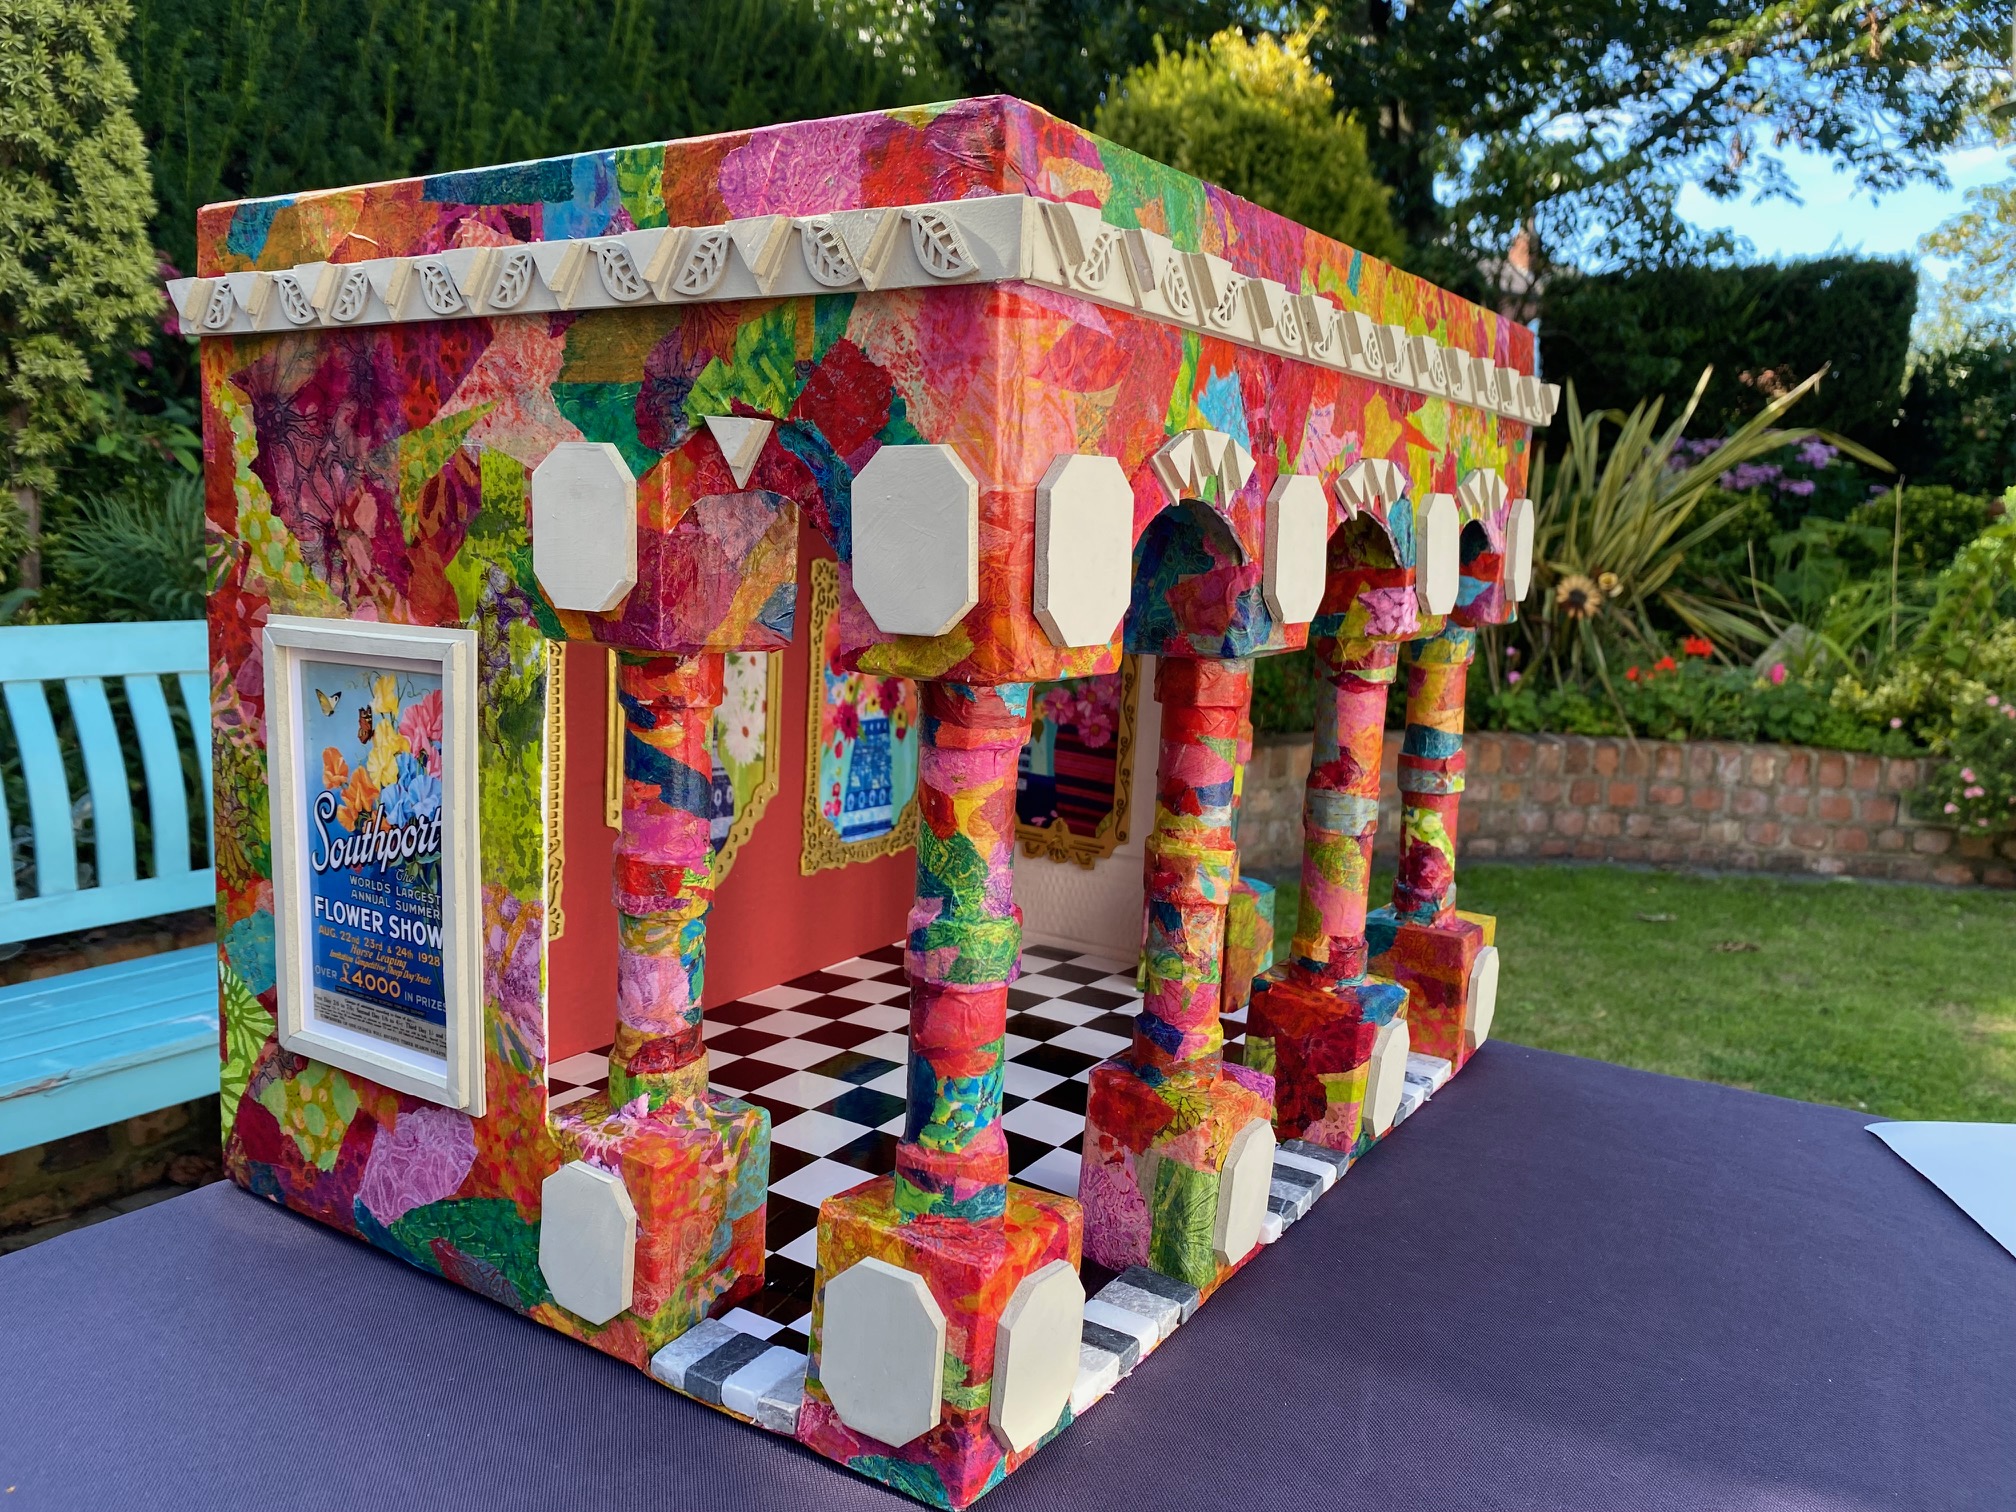 Carole Dawber has transformed her box into a glorified representation of the symmetrical three-bay portico that fronts The Atkinson on Lord Street